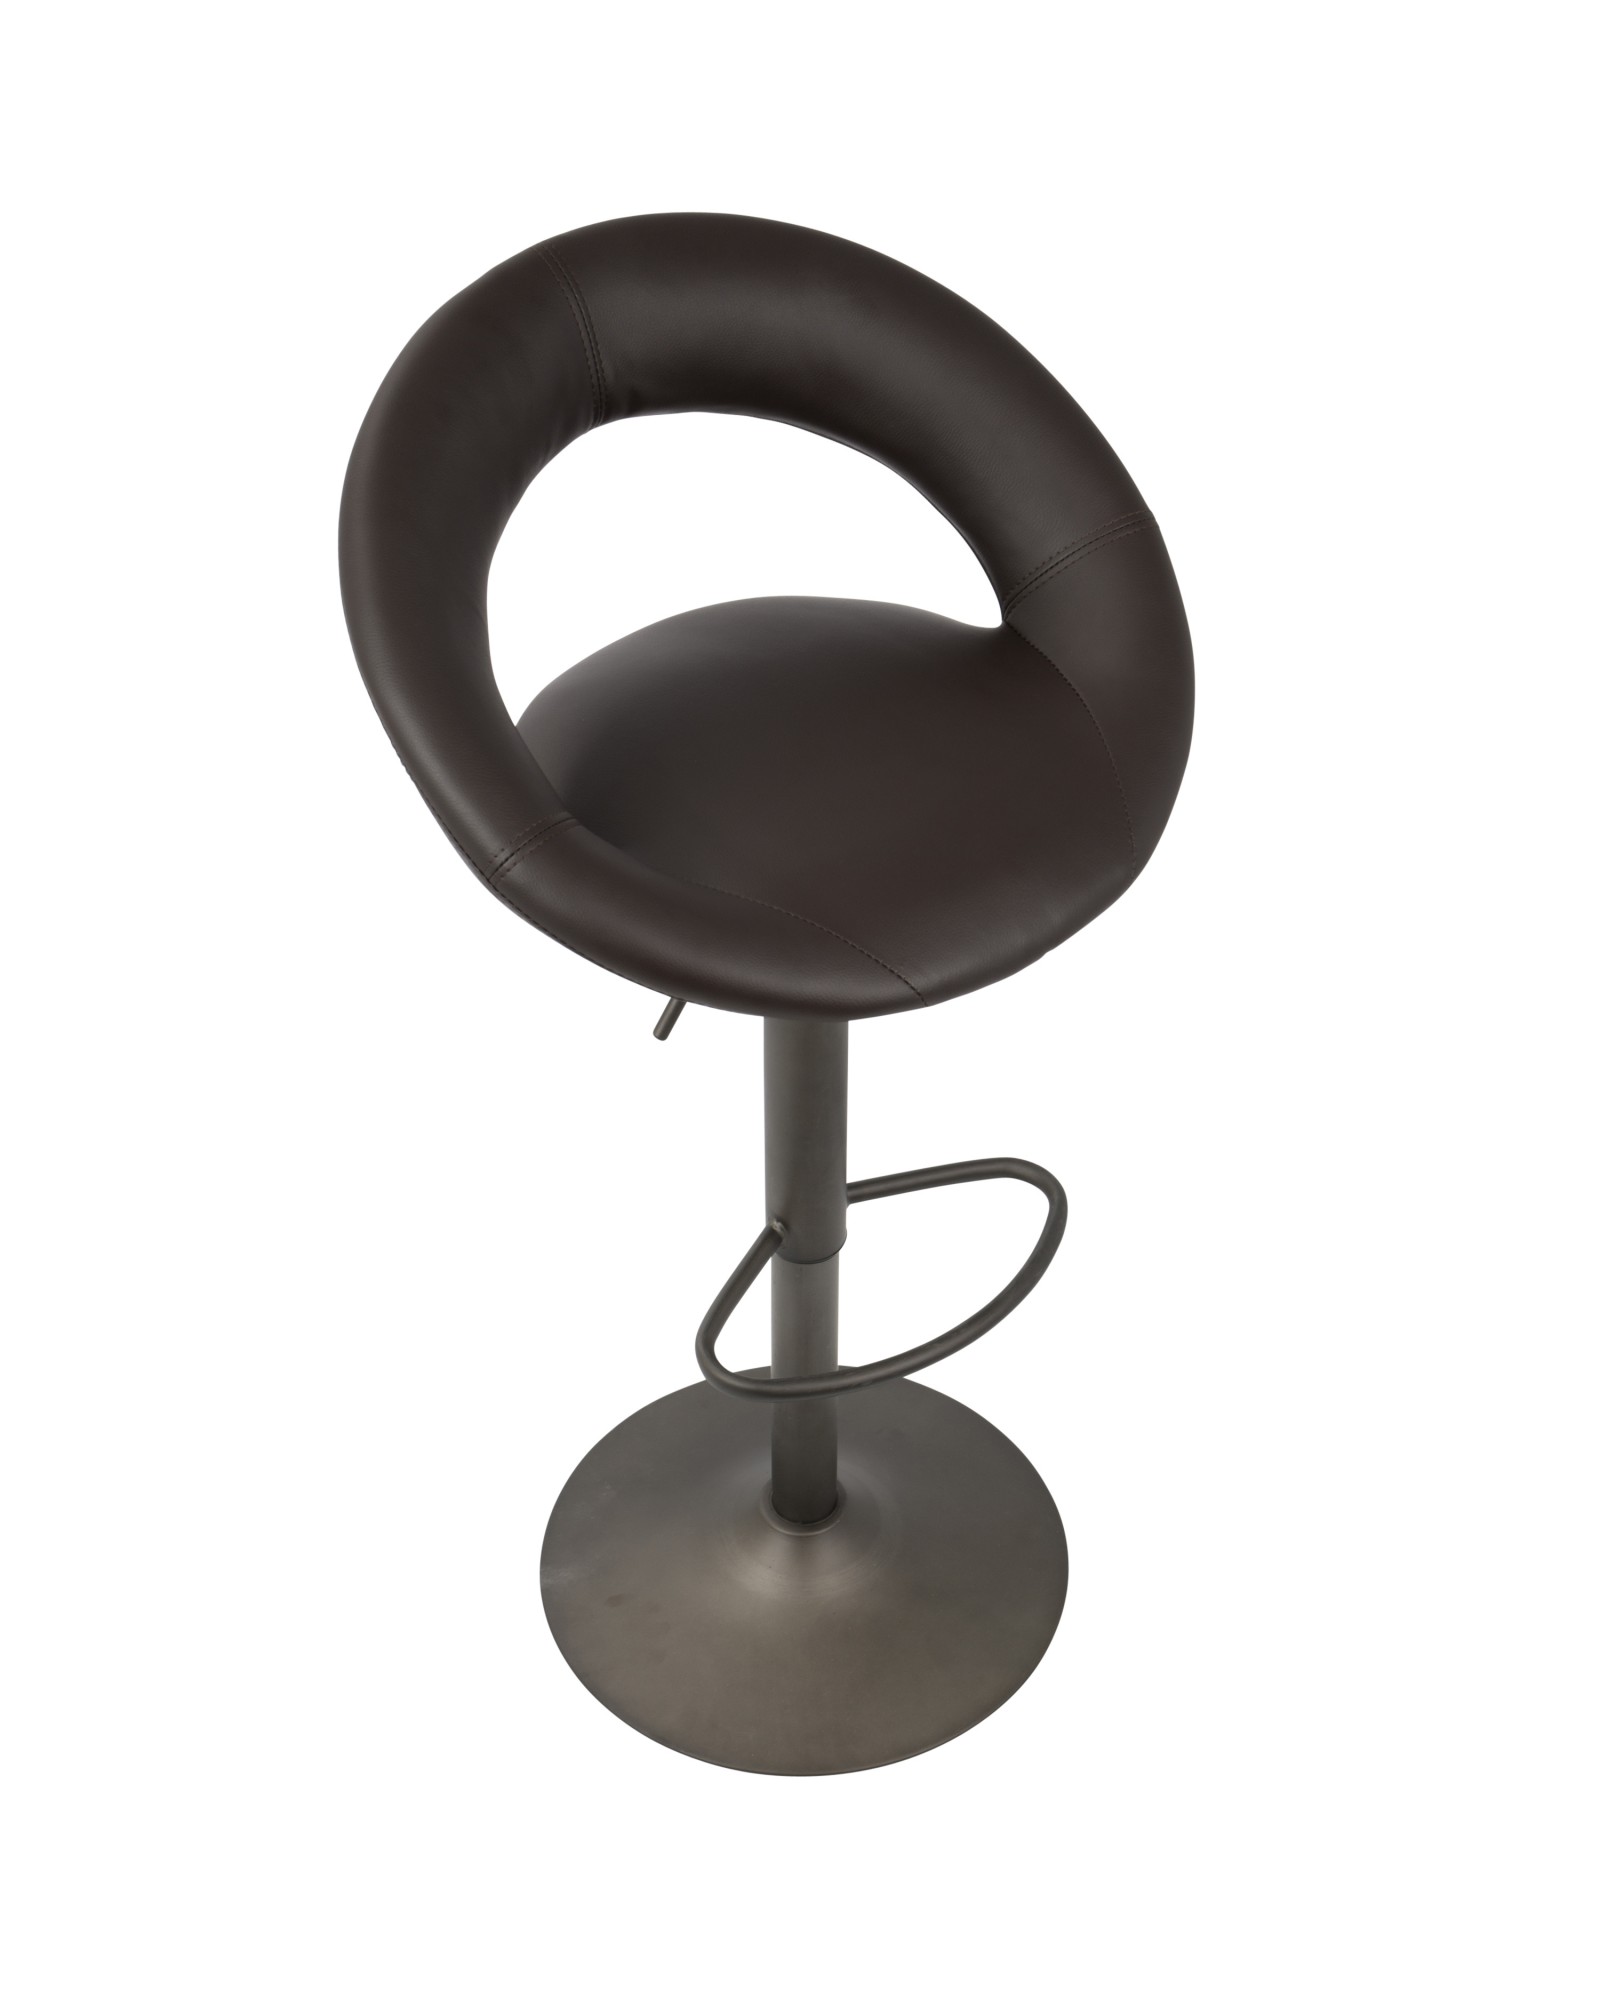 Metro Contemporary Adjustable Barstool in Antique with Brown Faux Leather - Set of 2